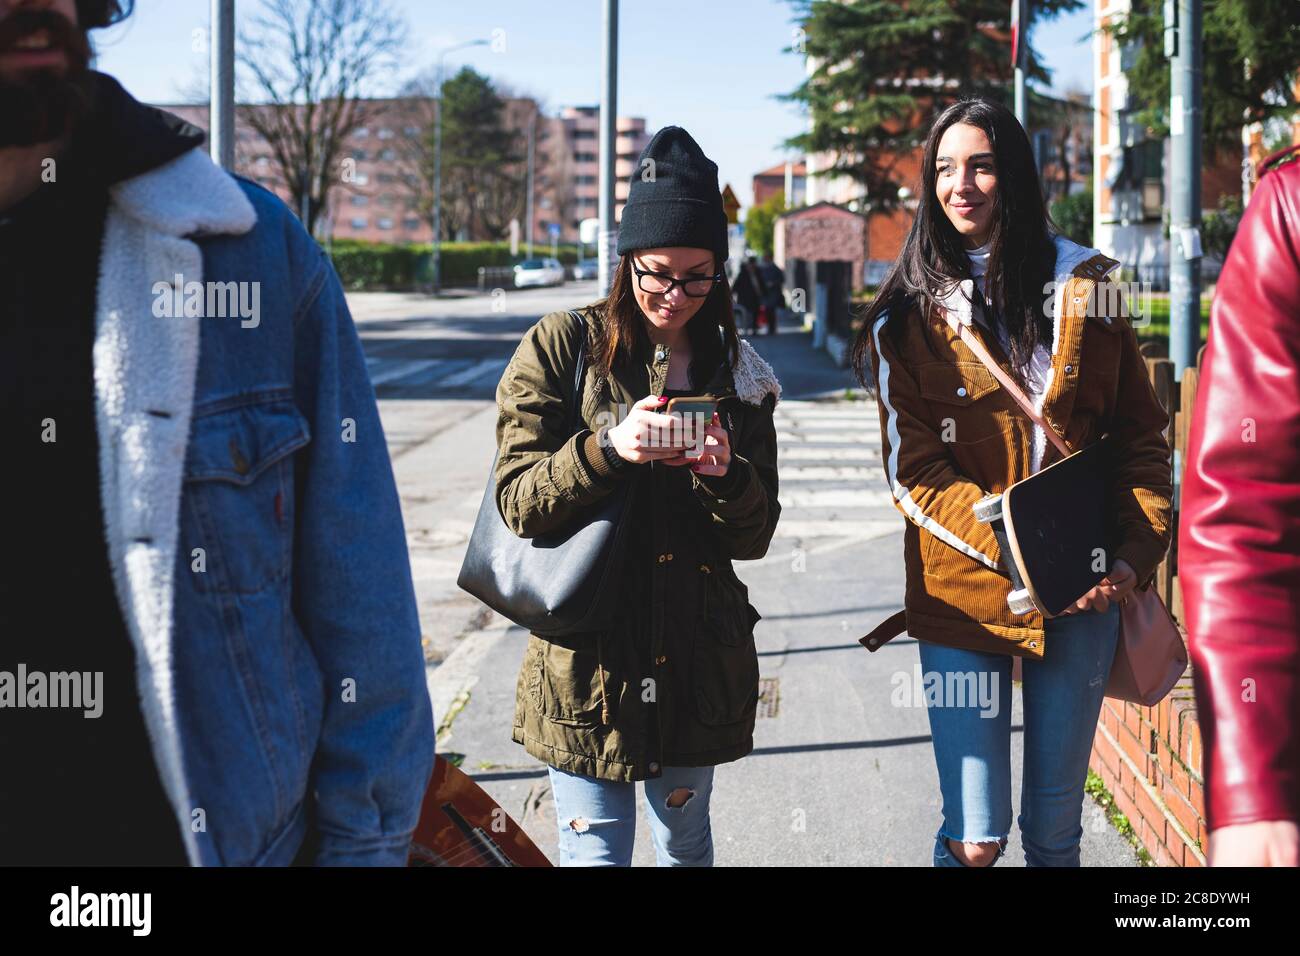 Woman using smart phone while walking with friends on sidewalk in city Stock Photo